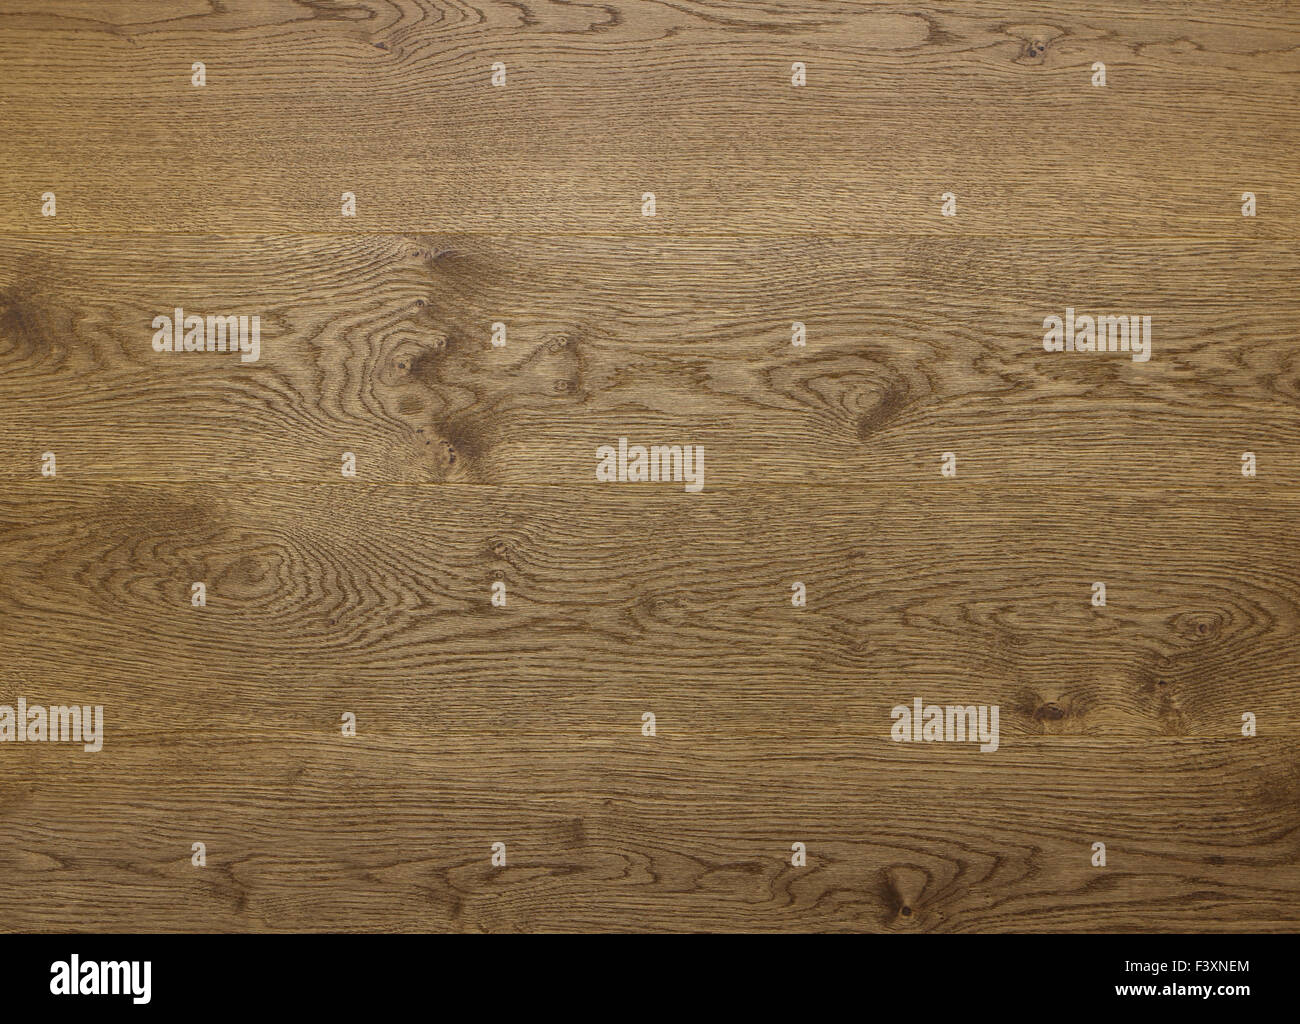 wooden background Stock Photo